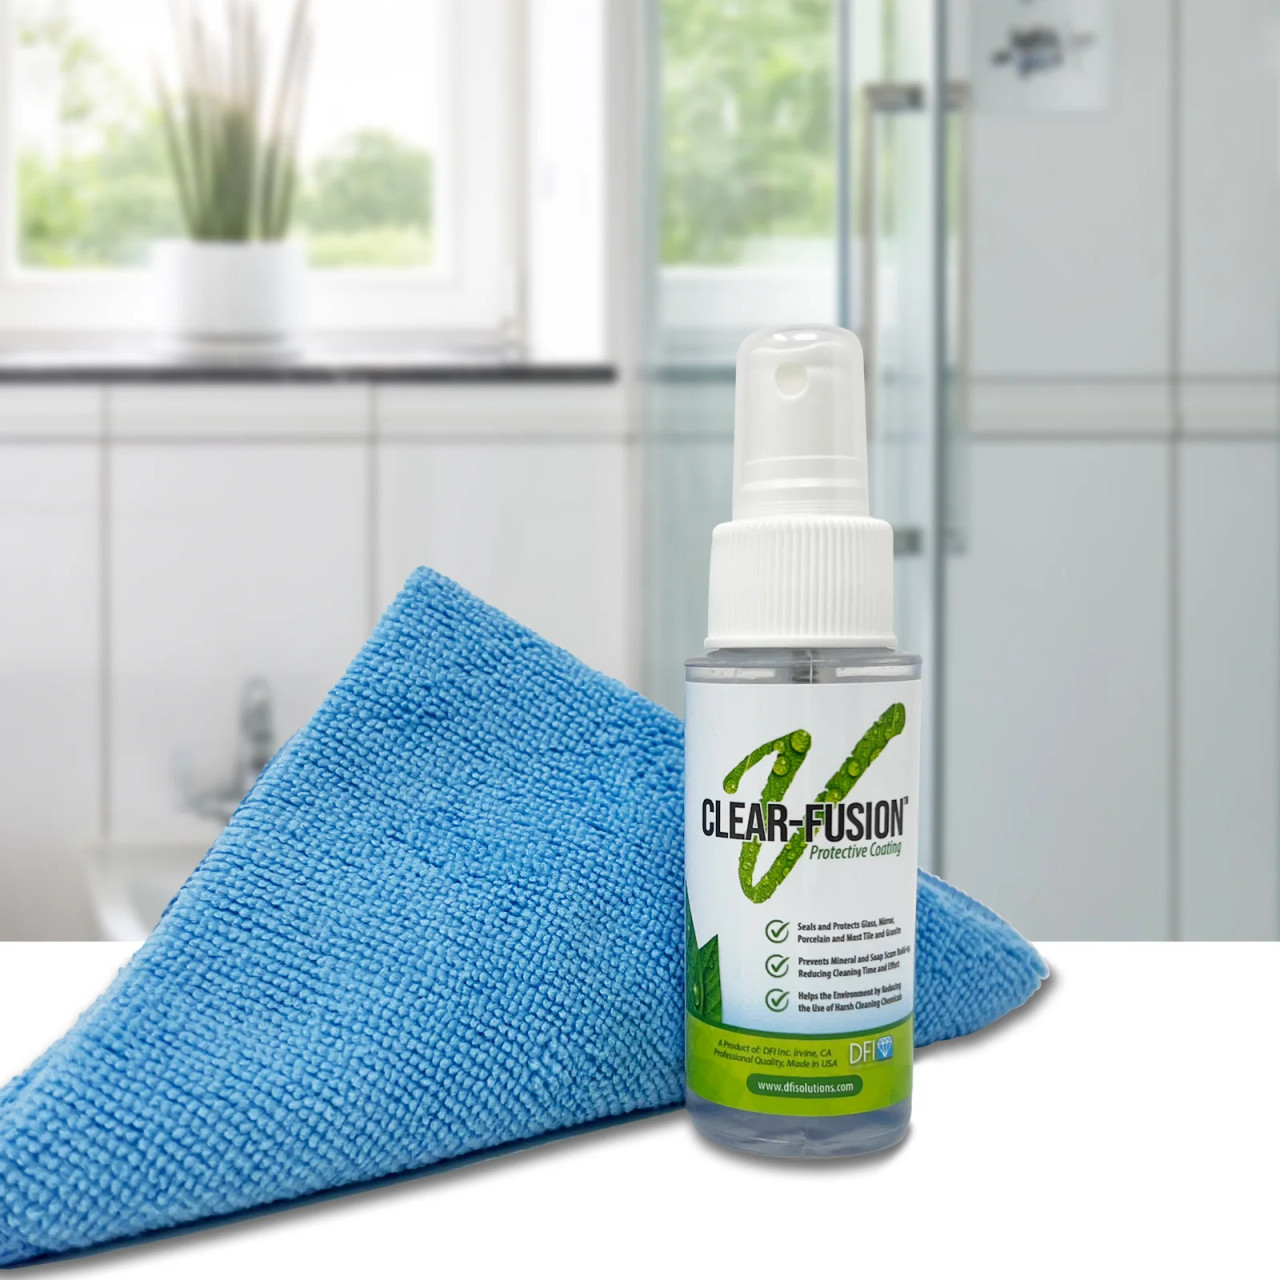 HOW YOU SHOULD BE CLEANING YOUR SHOWER GLASS DOORS - Diamond Fusion